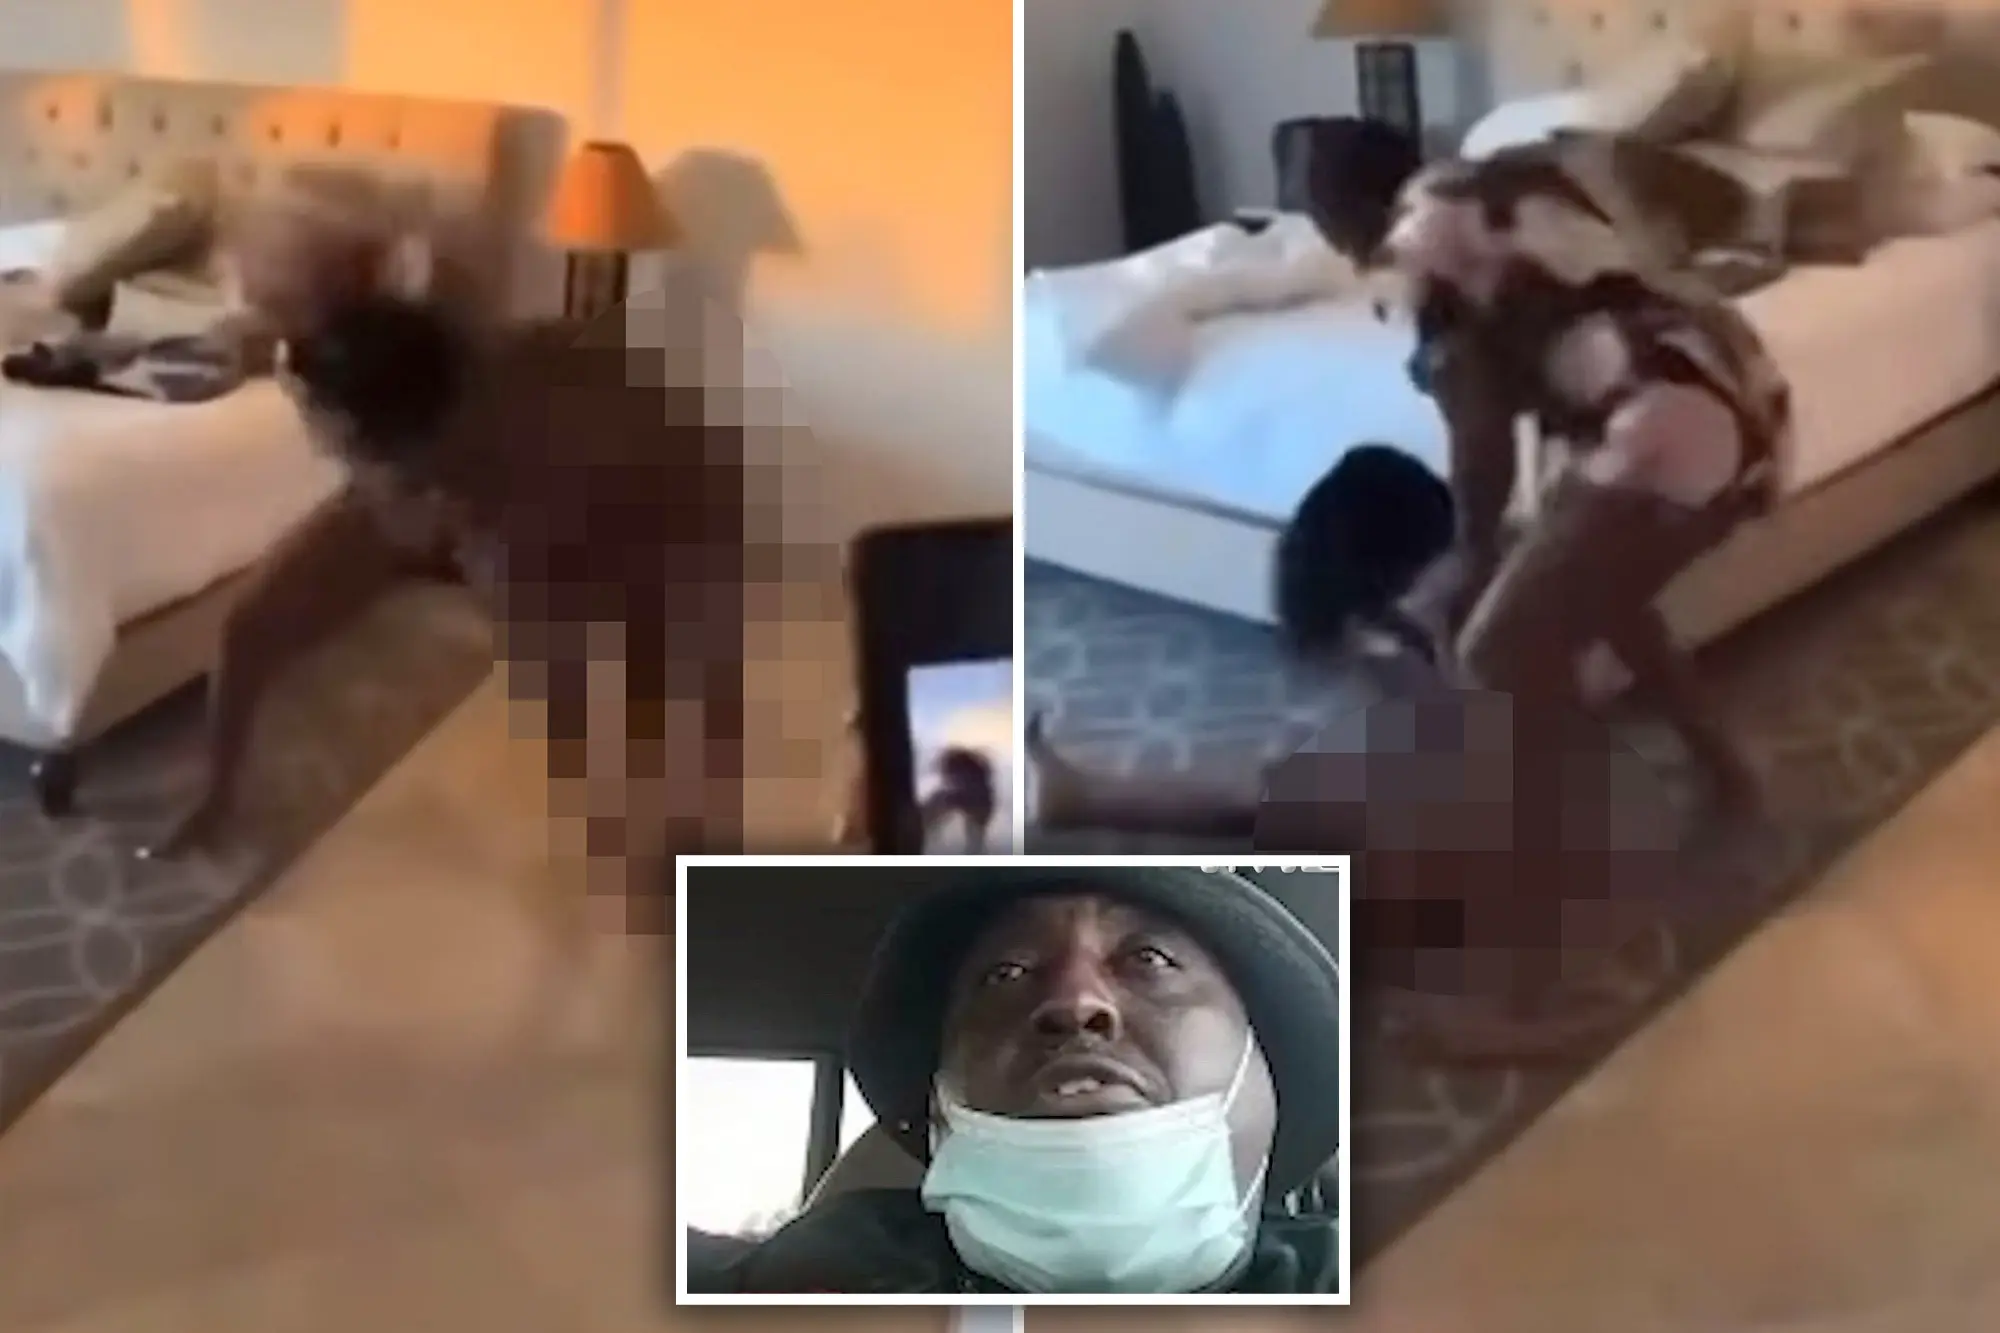 The SHANQUELLA ROBINSON's CABO FIGHT full VIDEO goes viral on Twitter and Reddit